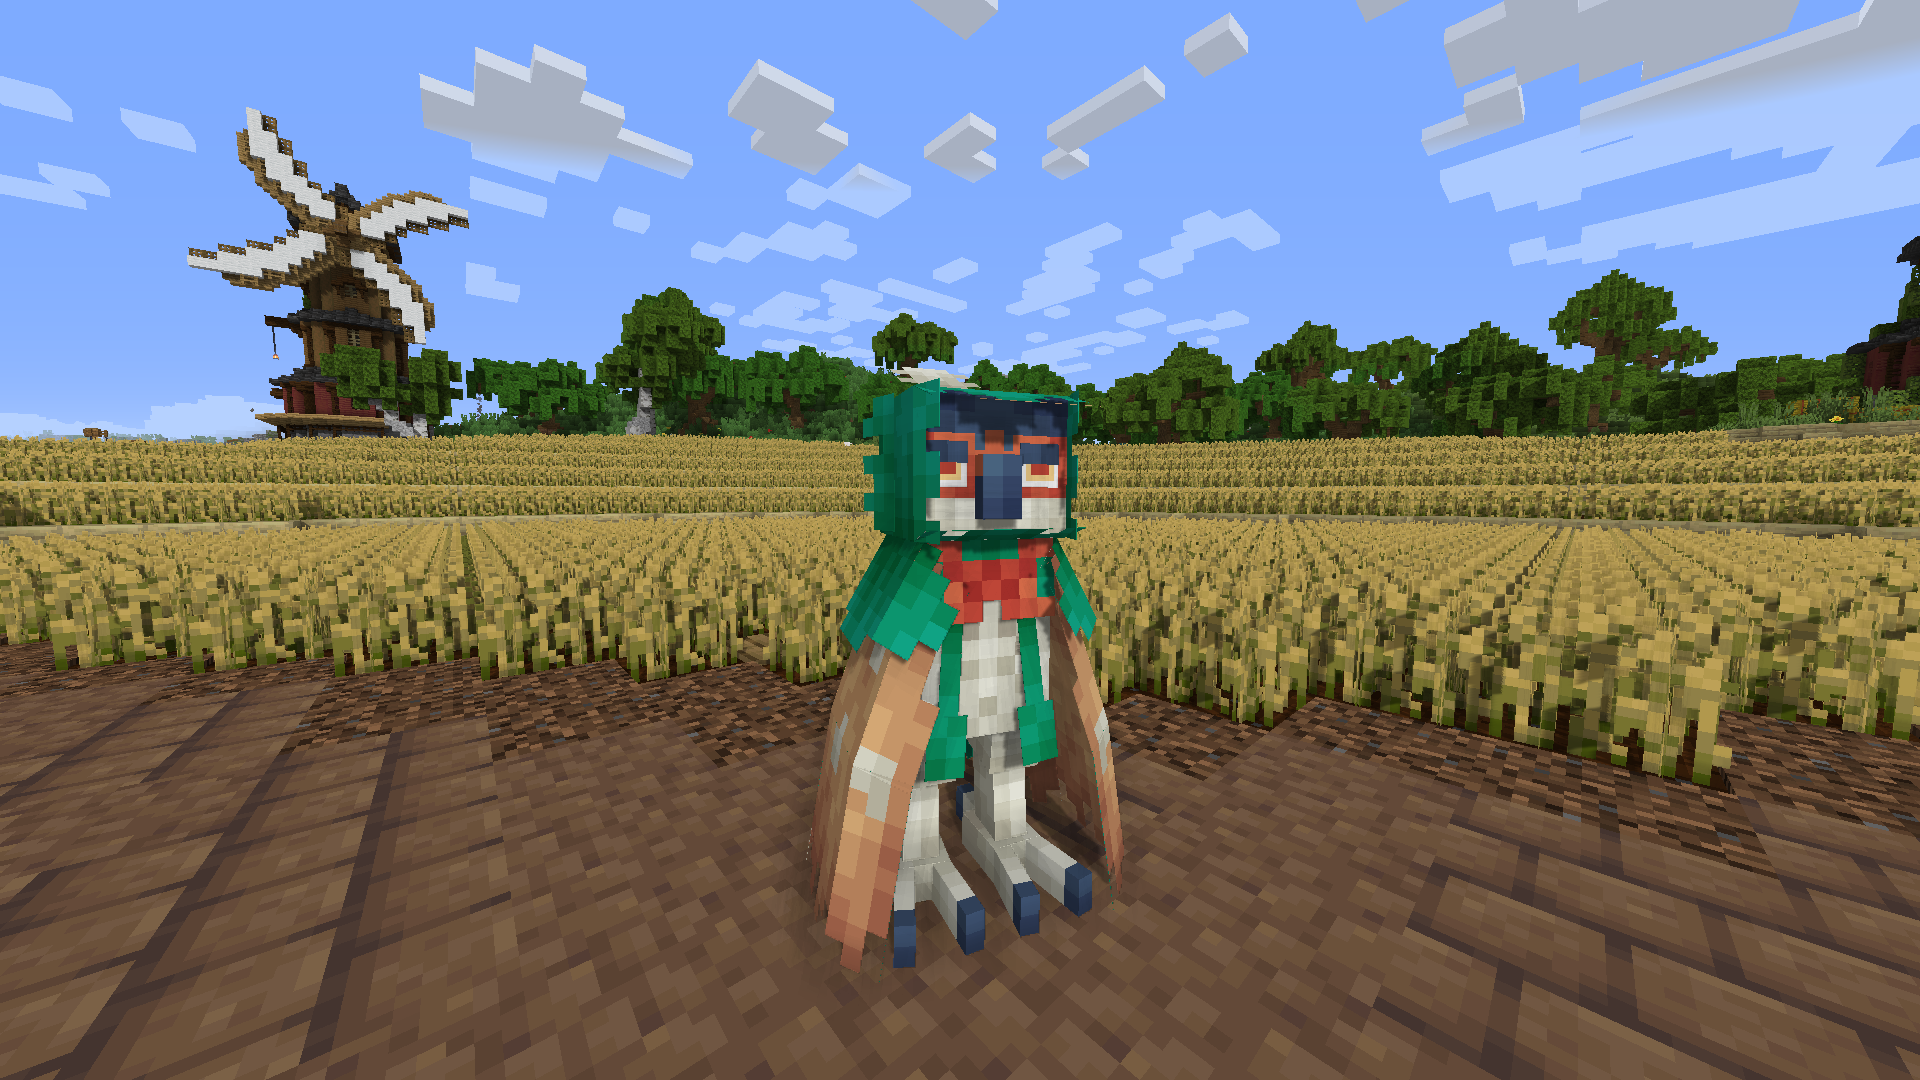 A Decidueye stands amidst a field of wheat. A windmill can be seen in the background.